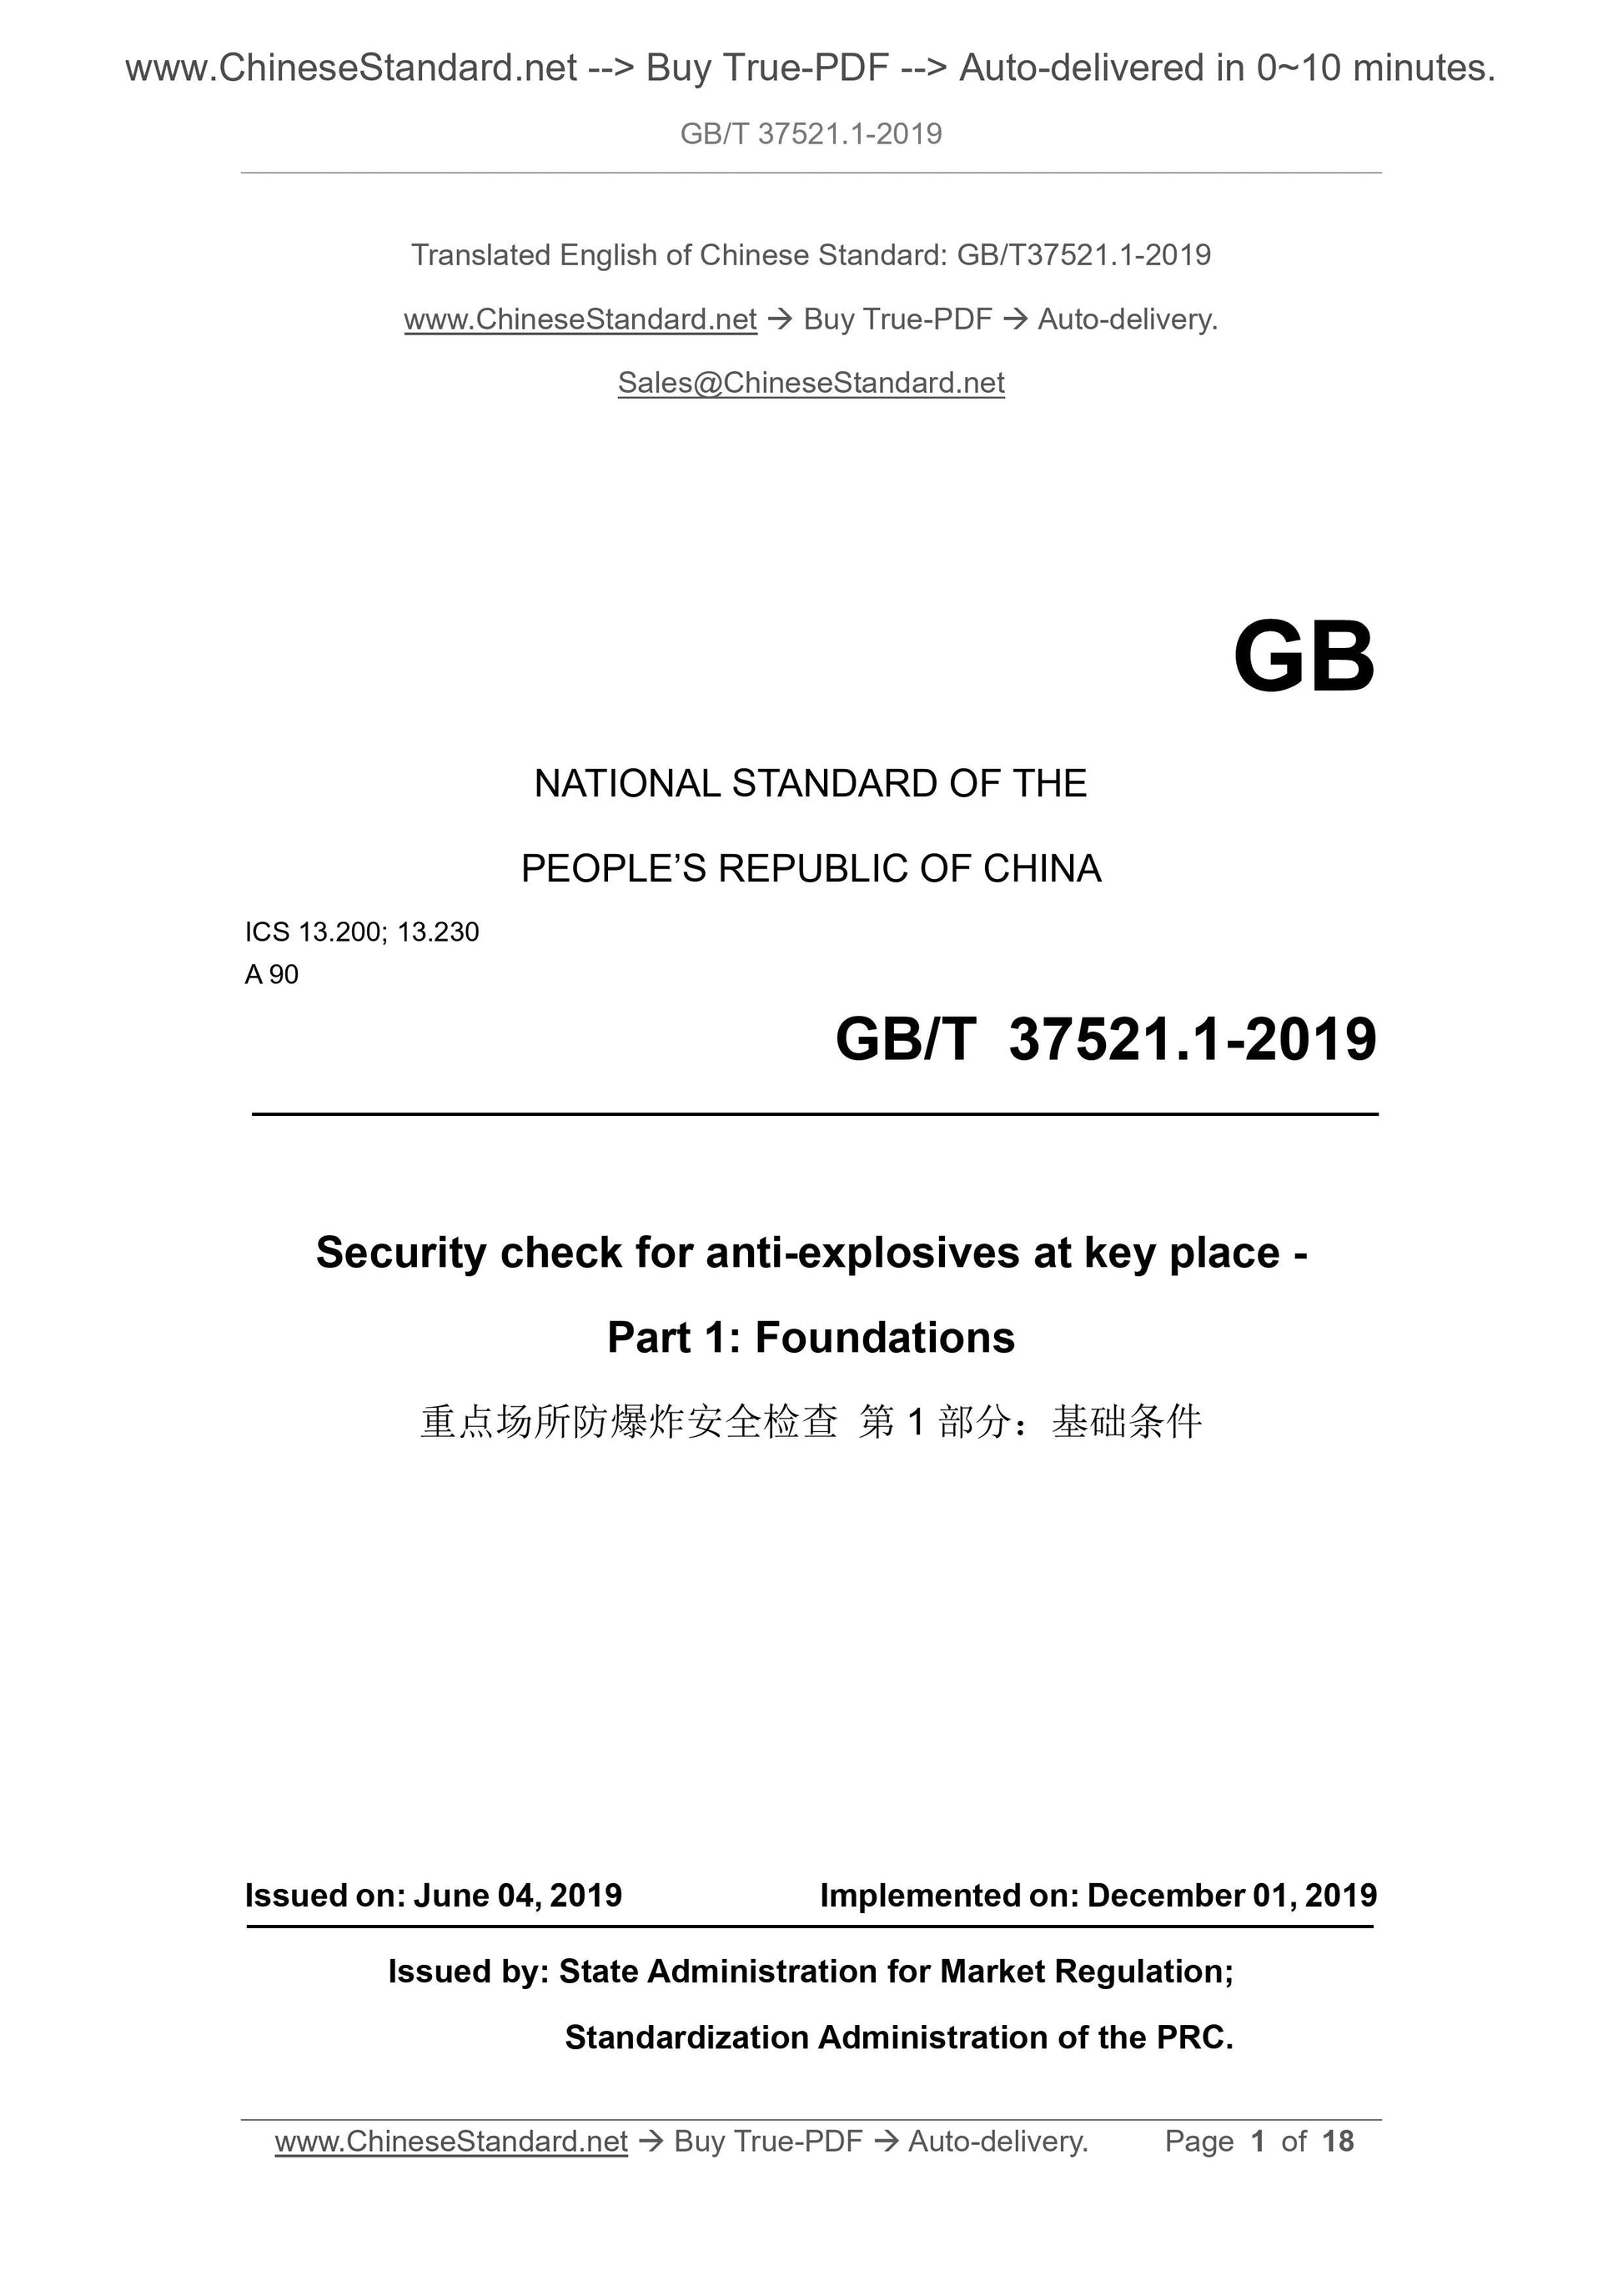 GB/T 37521.1-2019 Page 1